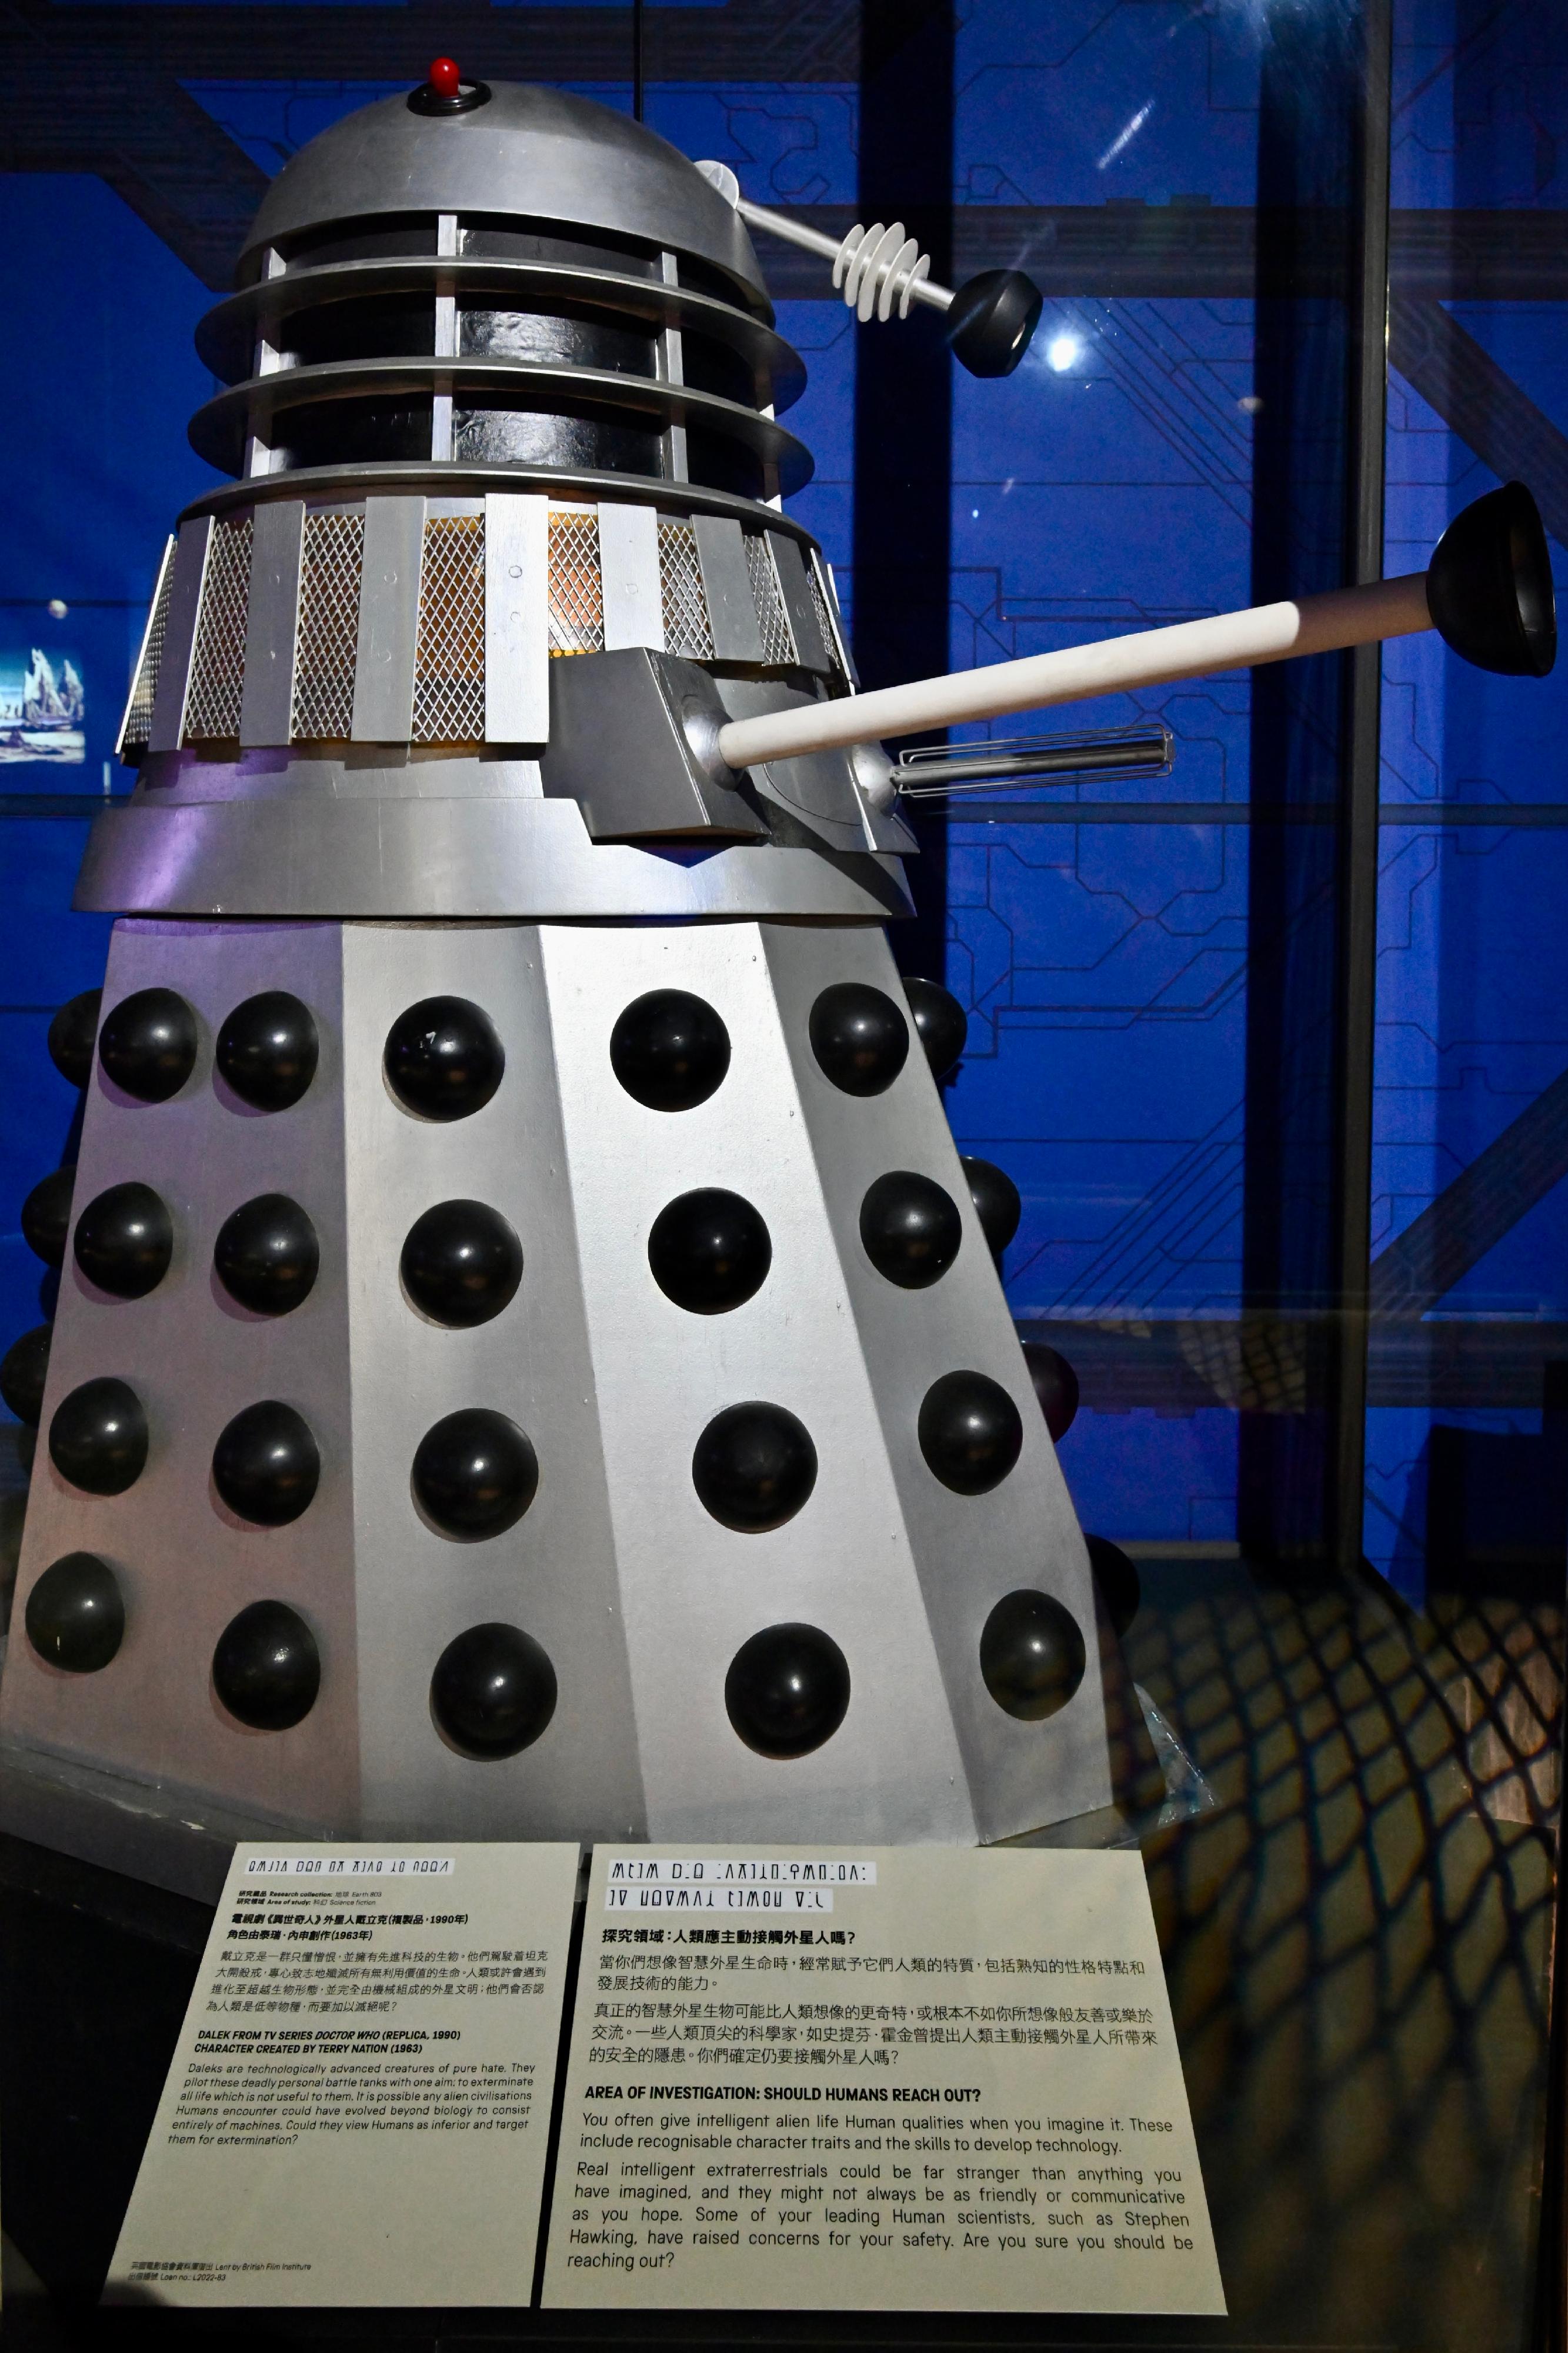 The Hong Kong Science Museum will launch a new special exhibition, "Science Fiction: Voyage to the Edge of Imagination", tomorrow (December 15). Photo shows the technologically advanced creature, Dalek, from TV series "Doctor Who" (replica).